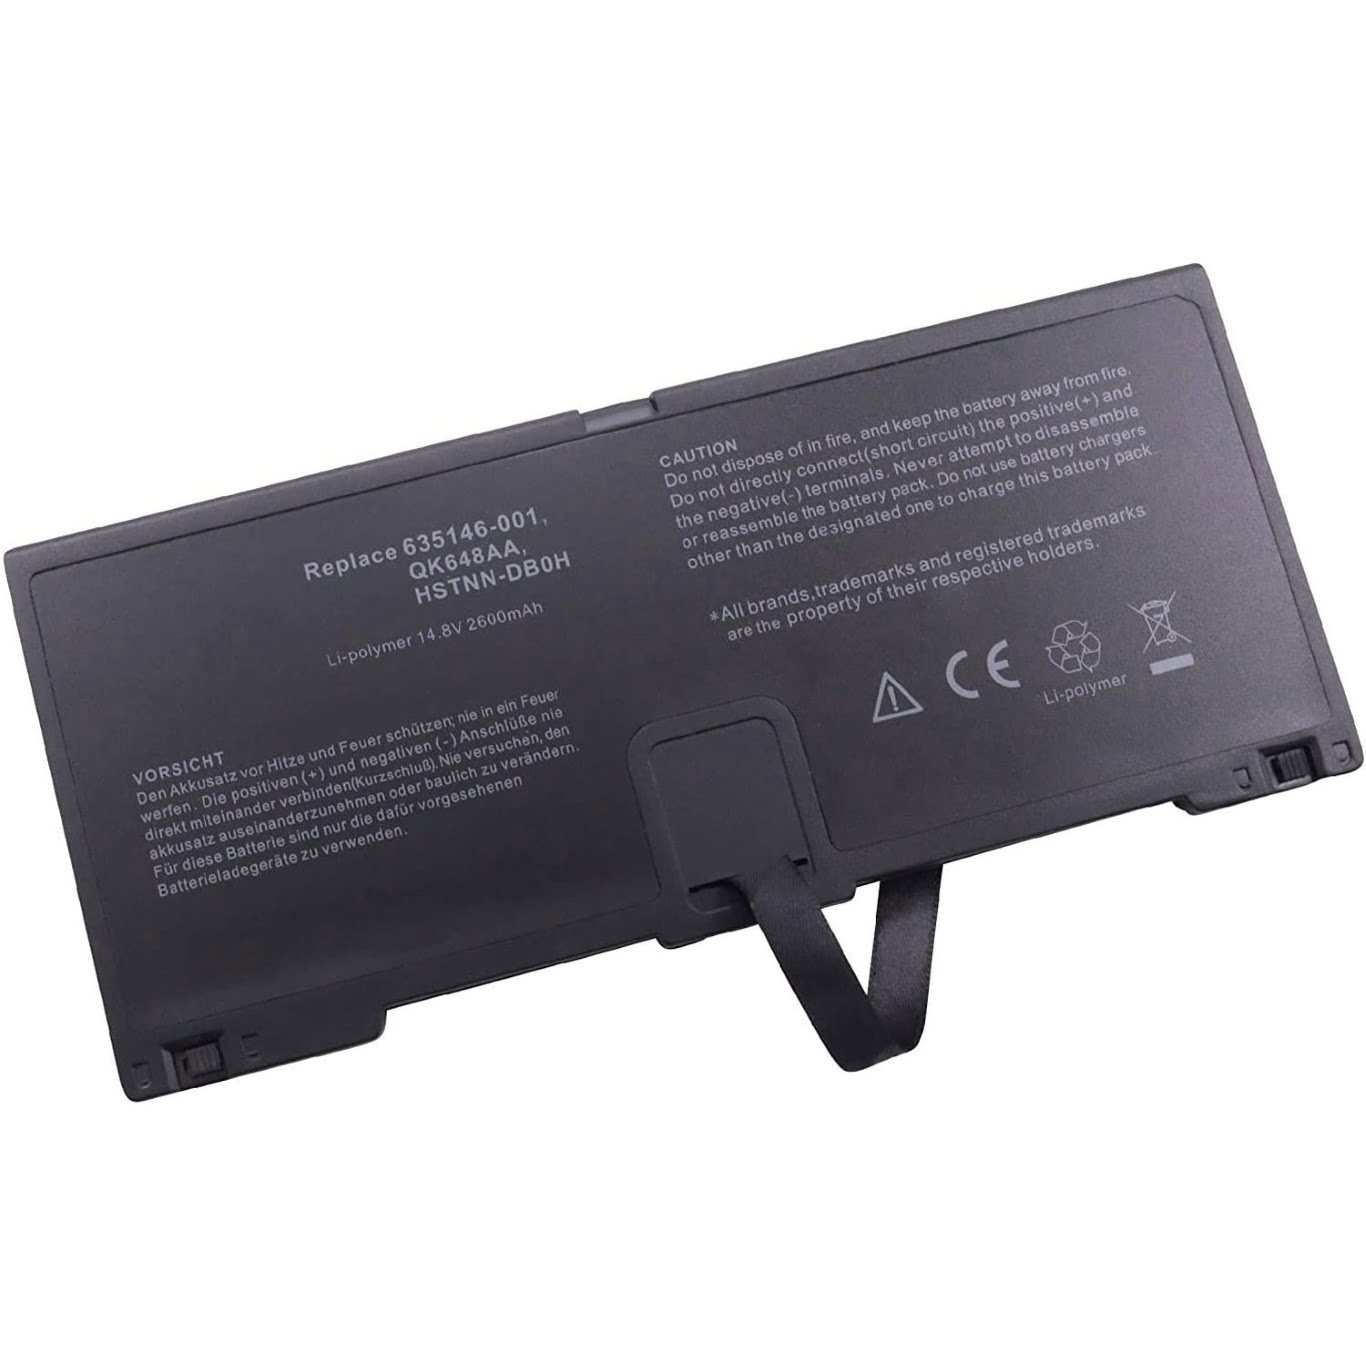 635146-001, FN04 replacement Laptop Battery for HP ProBook 5330m, 2600mAh, 4 cells, 14.8 V